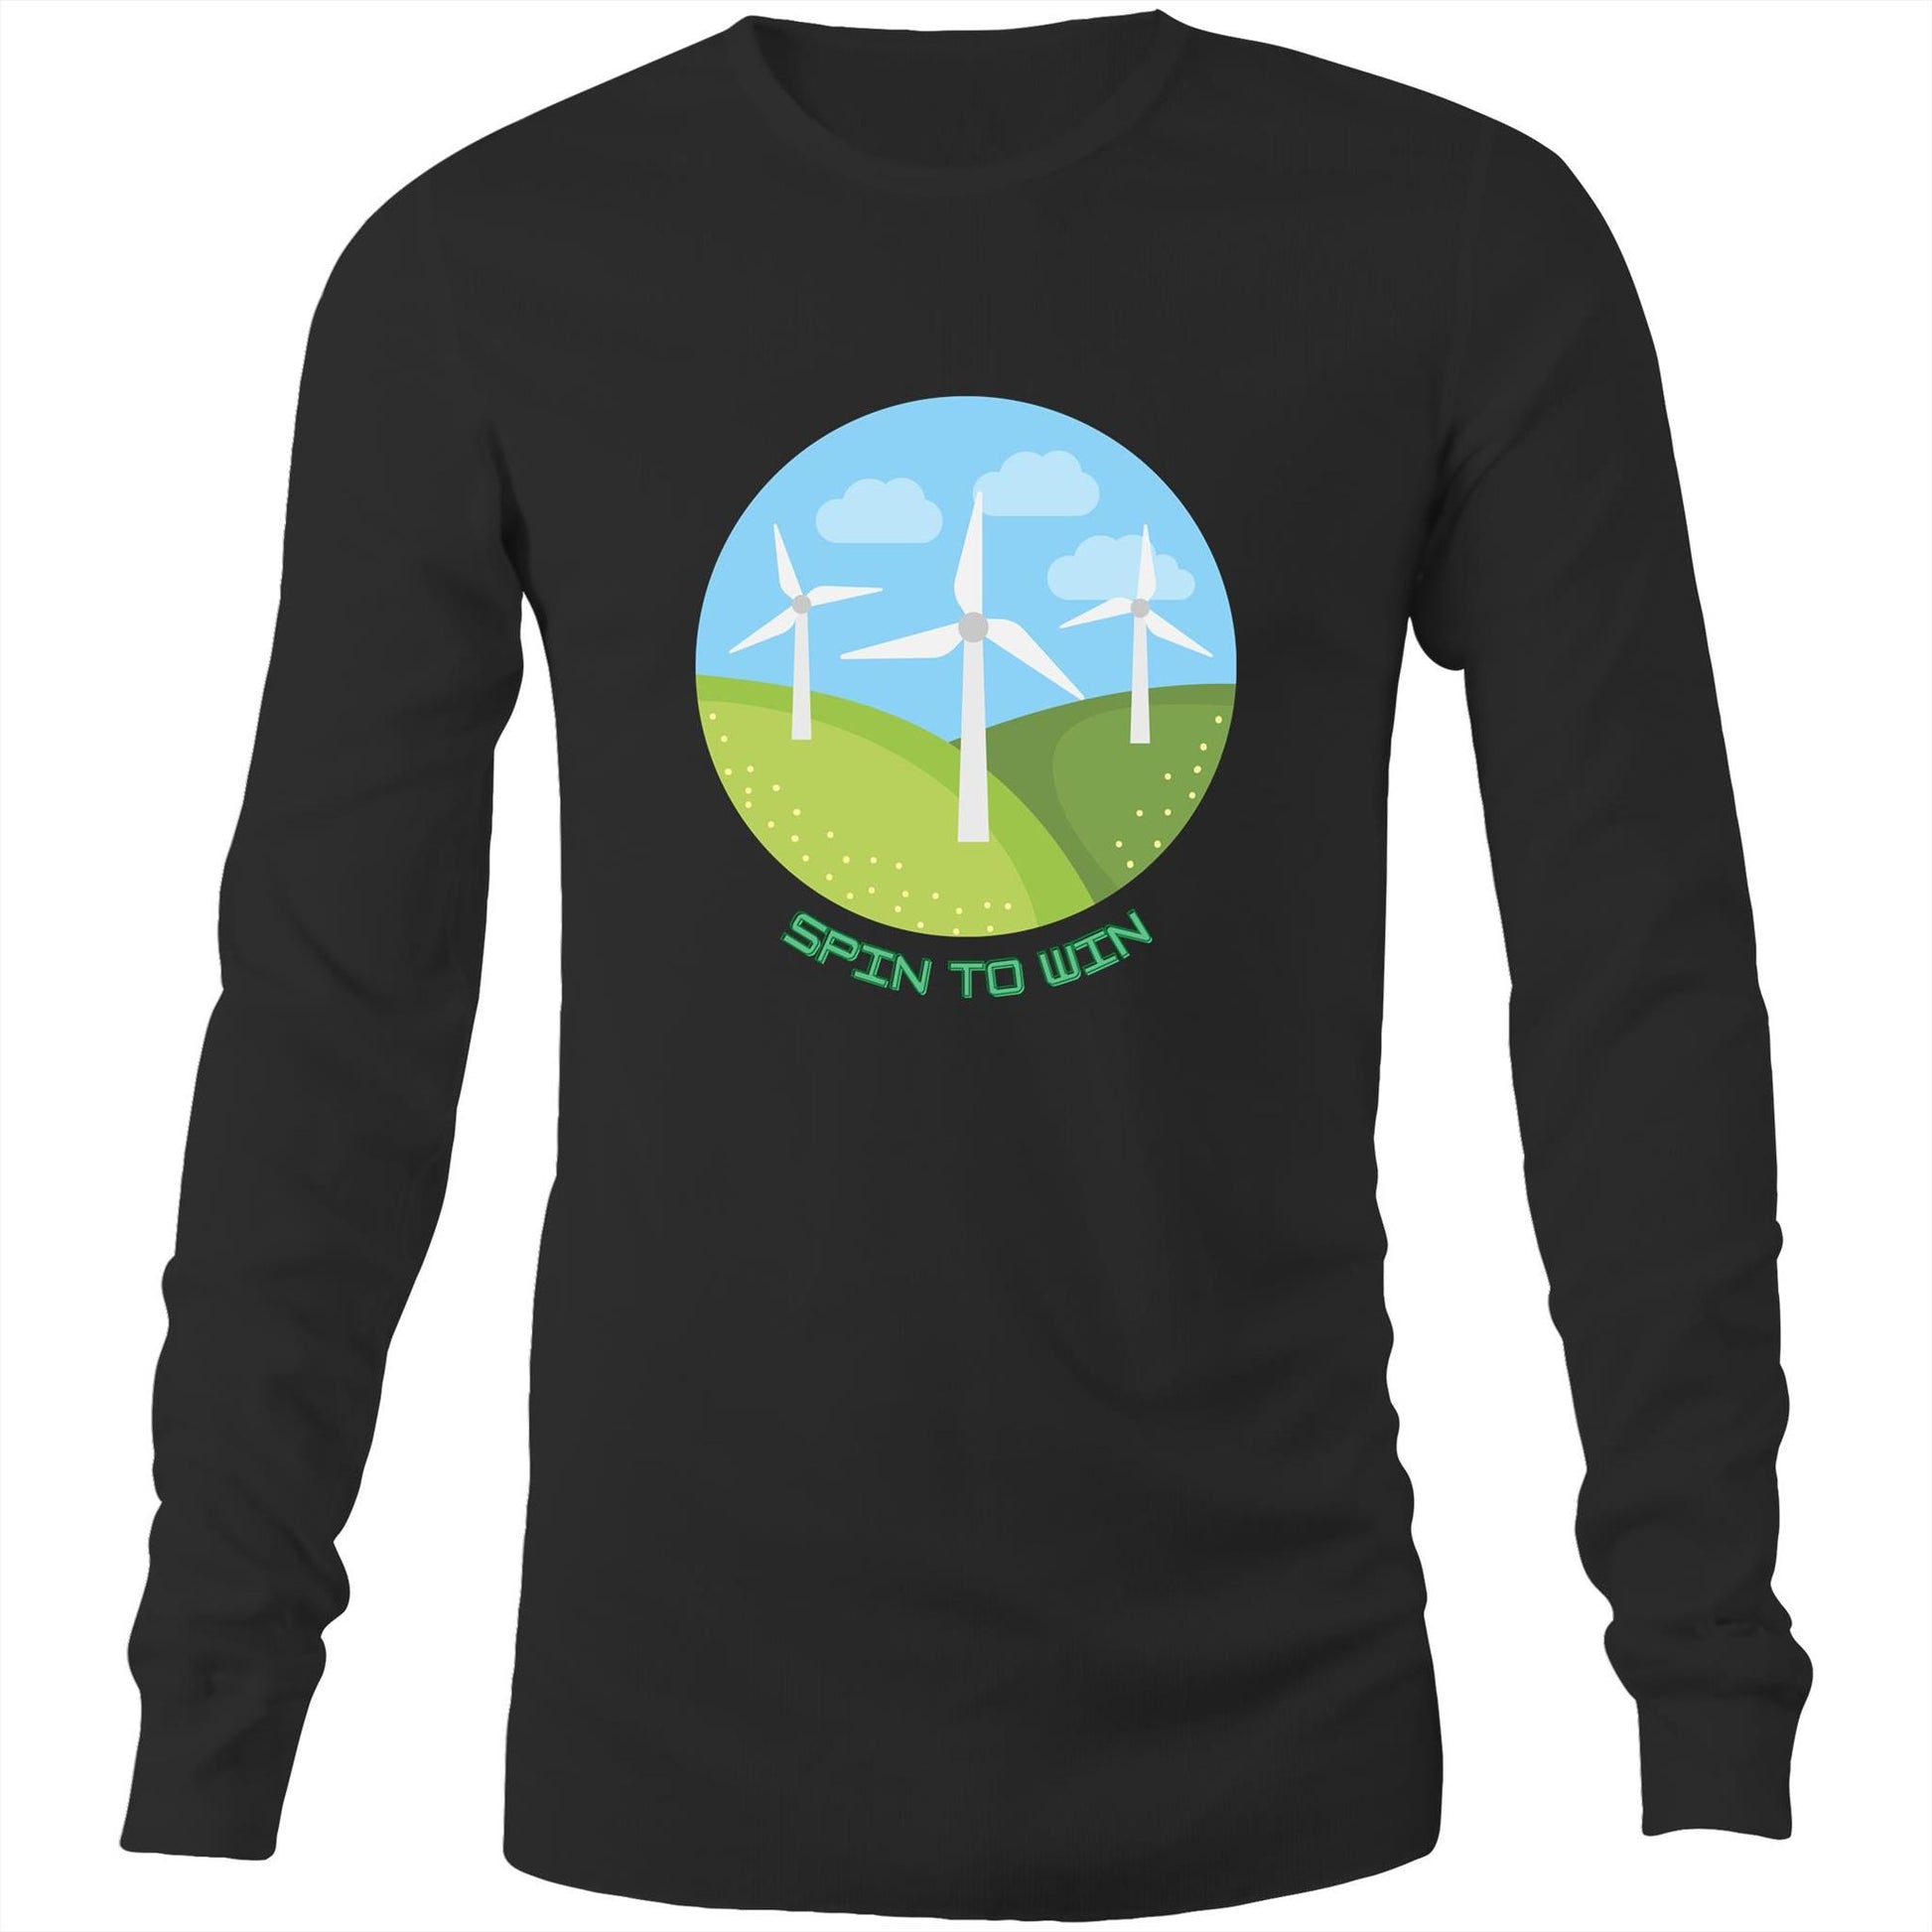 Spin To Win - Long Sleeve T-Shirt Black Unisex Long Sleeve T-shirt Environment Mens Womens